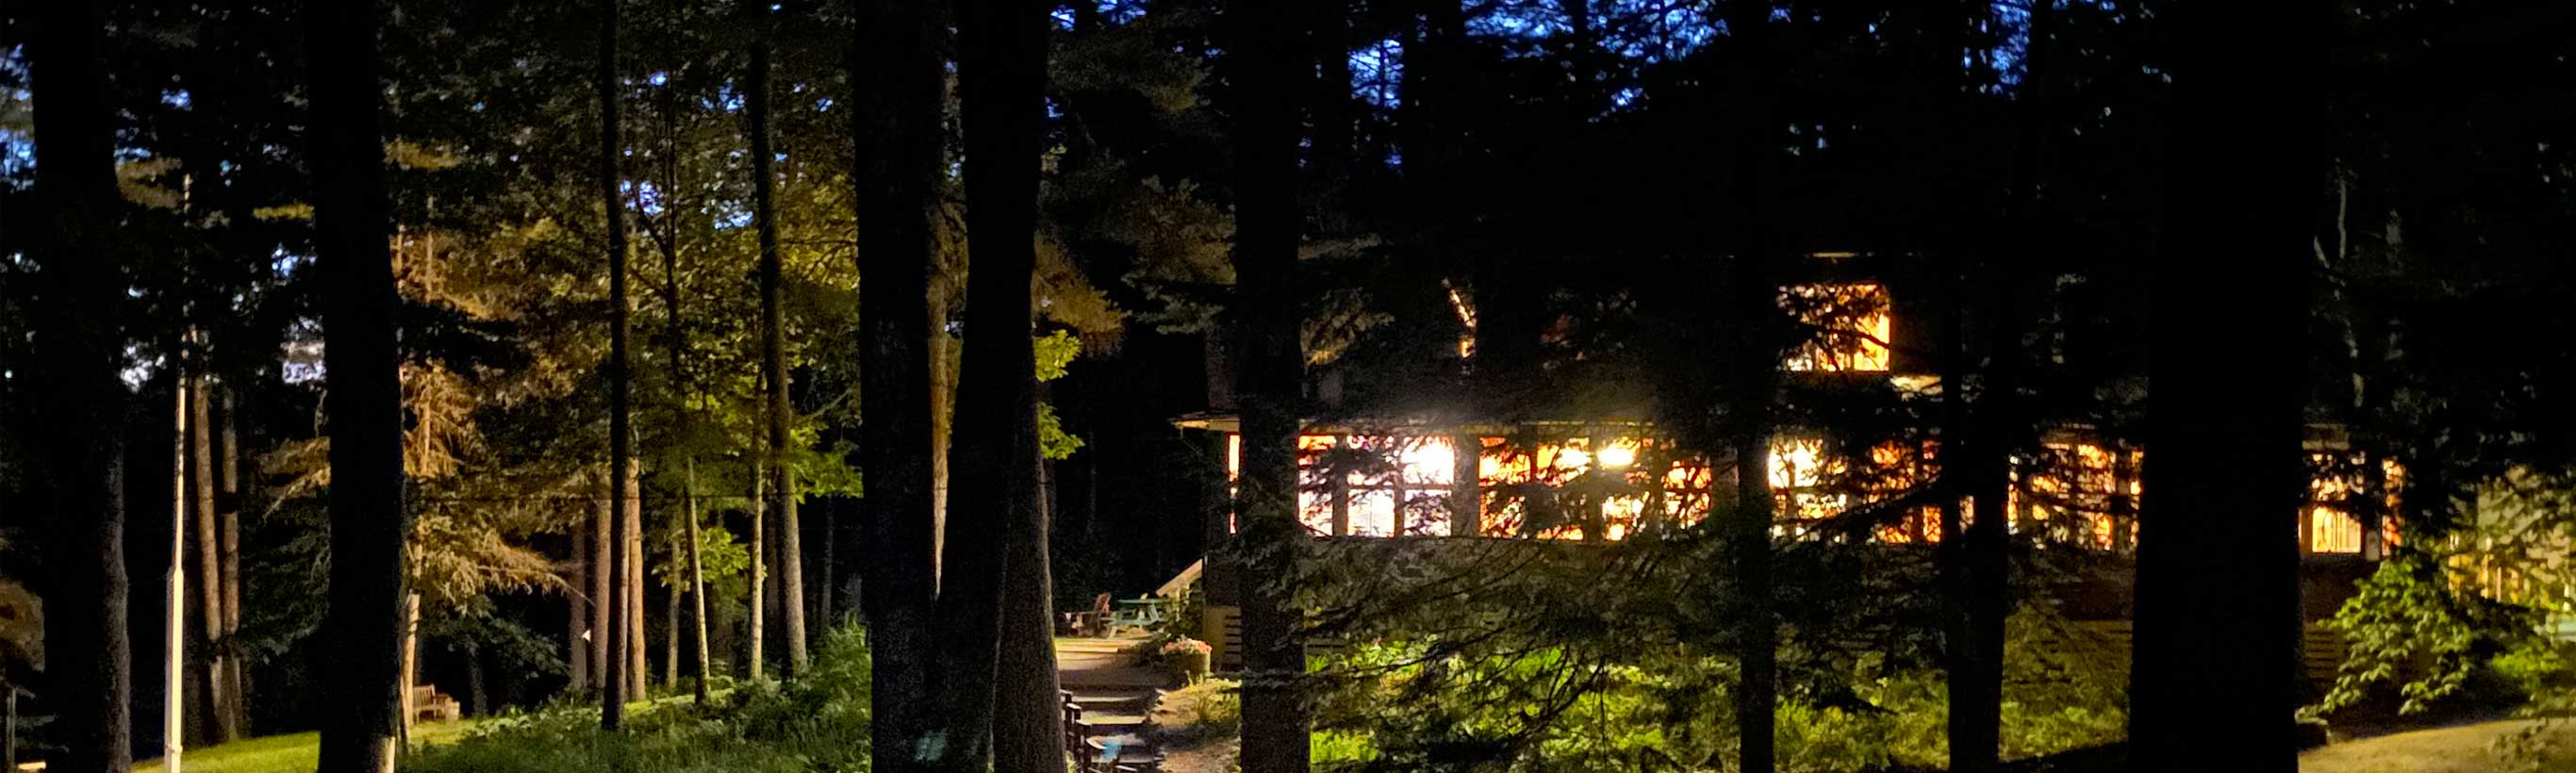 A well lit cabin in the woods at night.